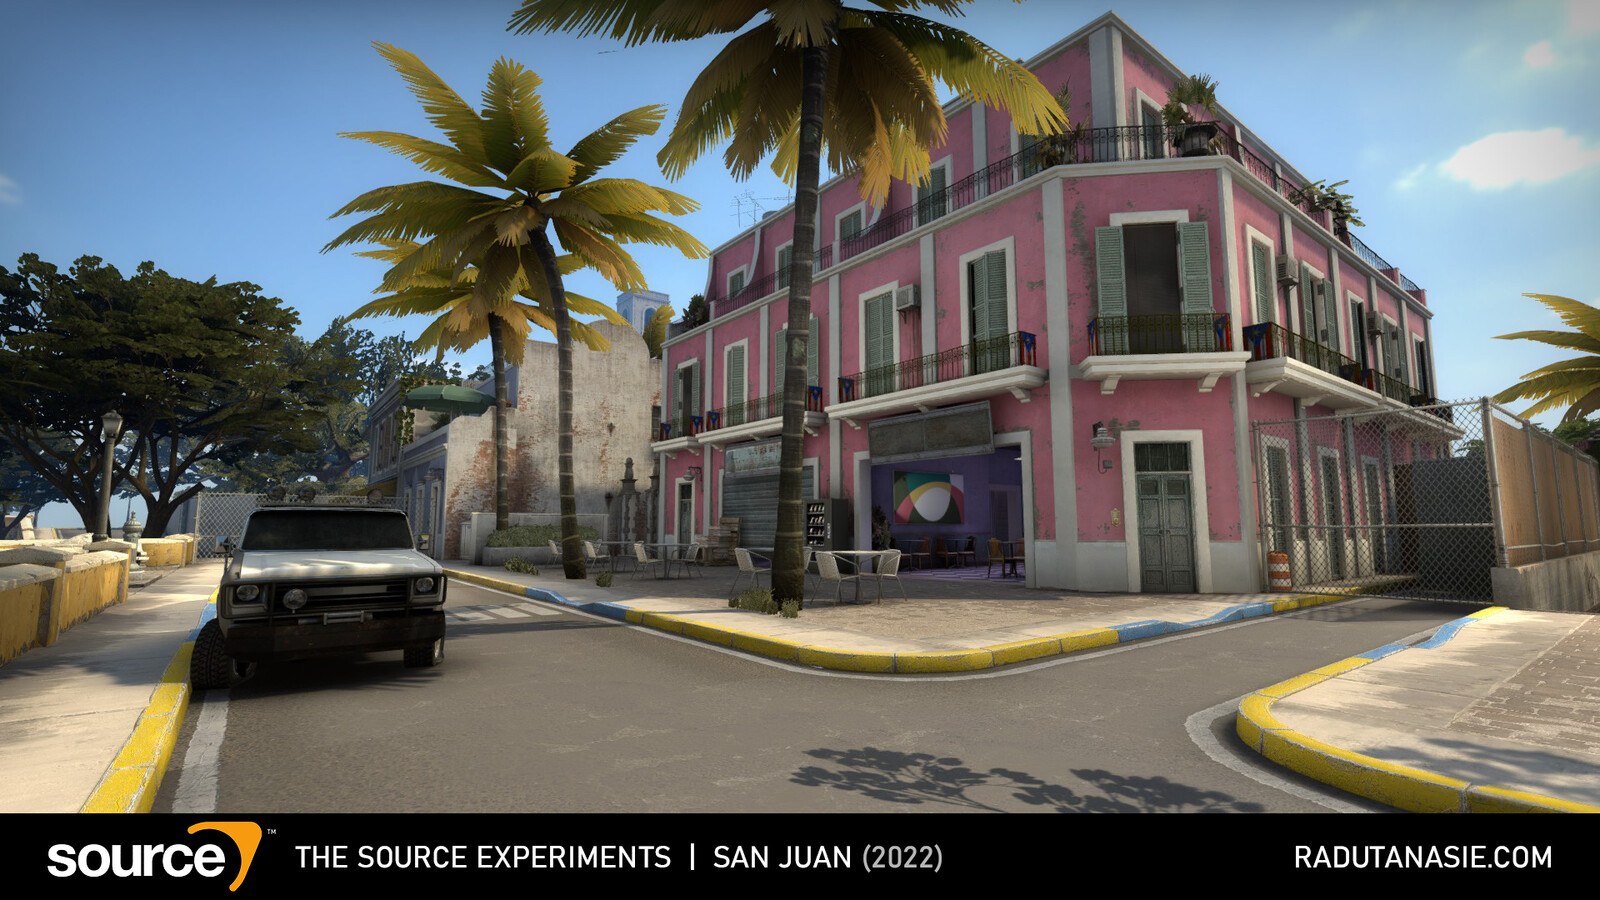 The attacking team starts similarly in a street, but is facing a bright pink hotel.